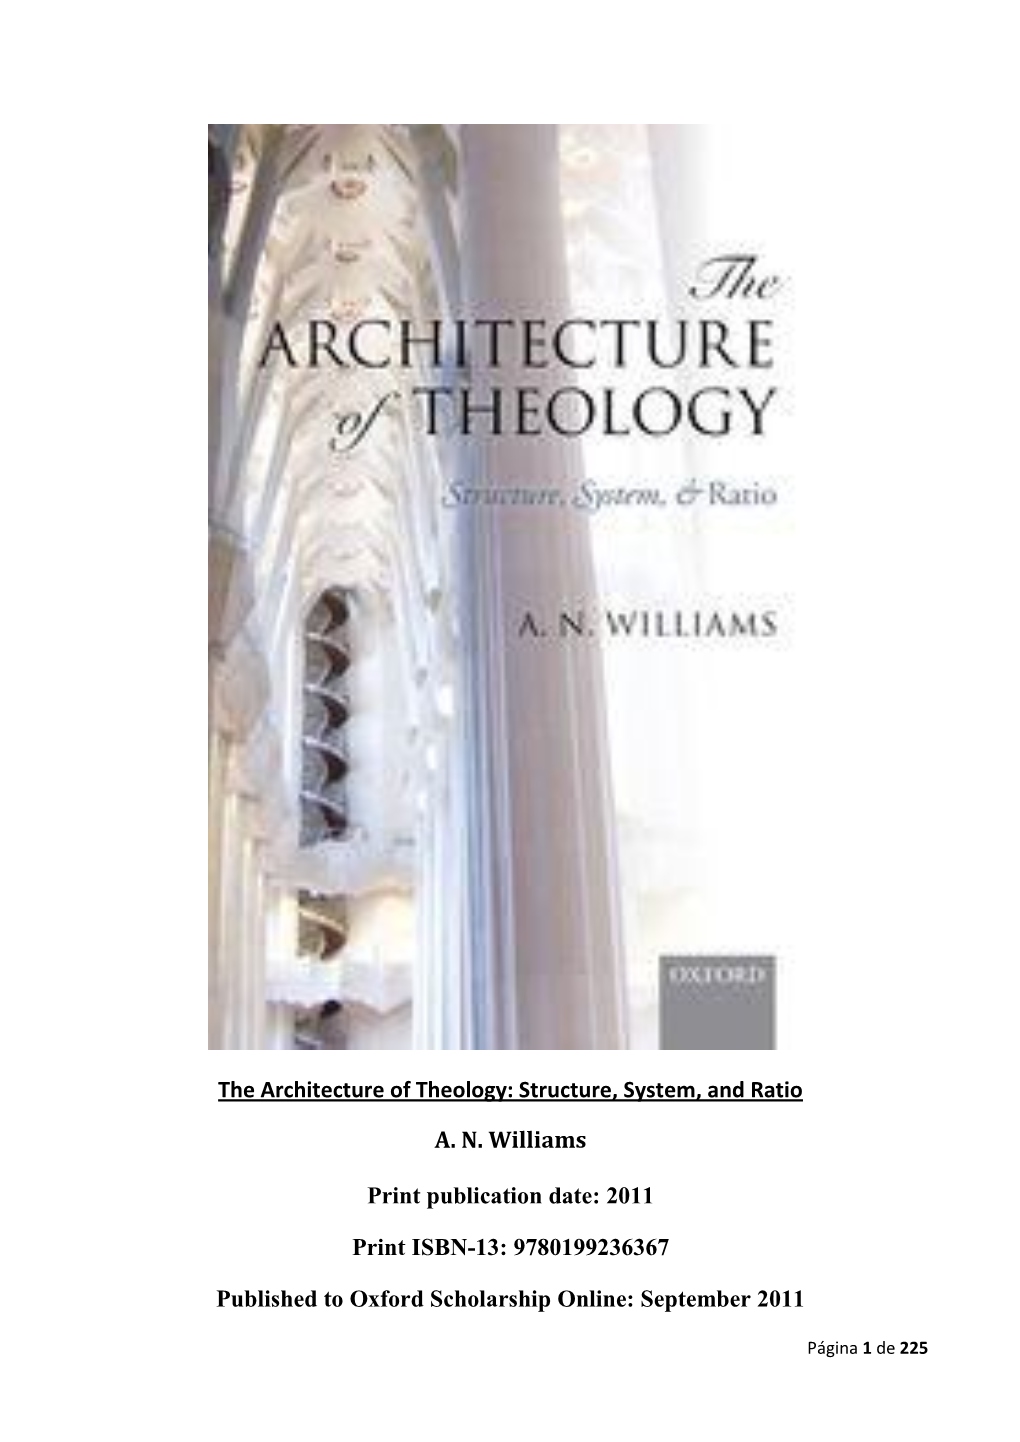 The Architecture of Theology: Structure, System, and Ratio A. N